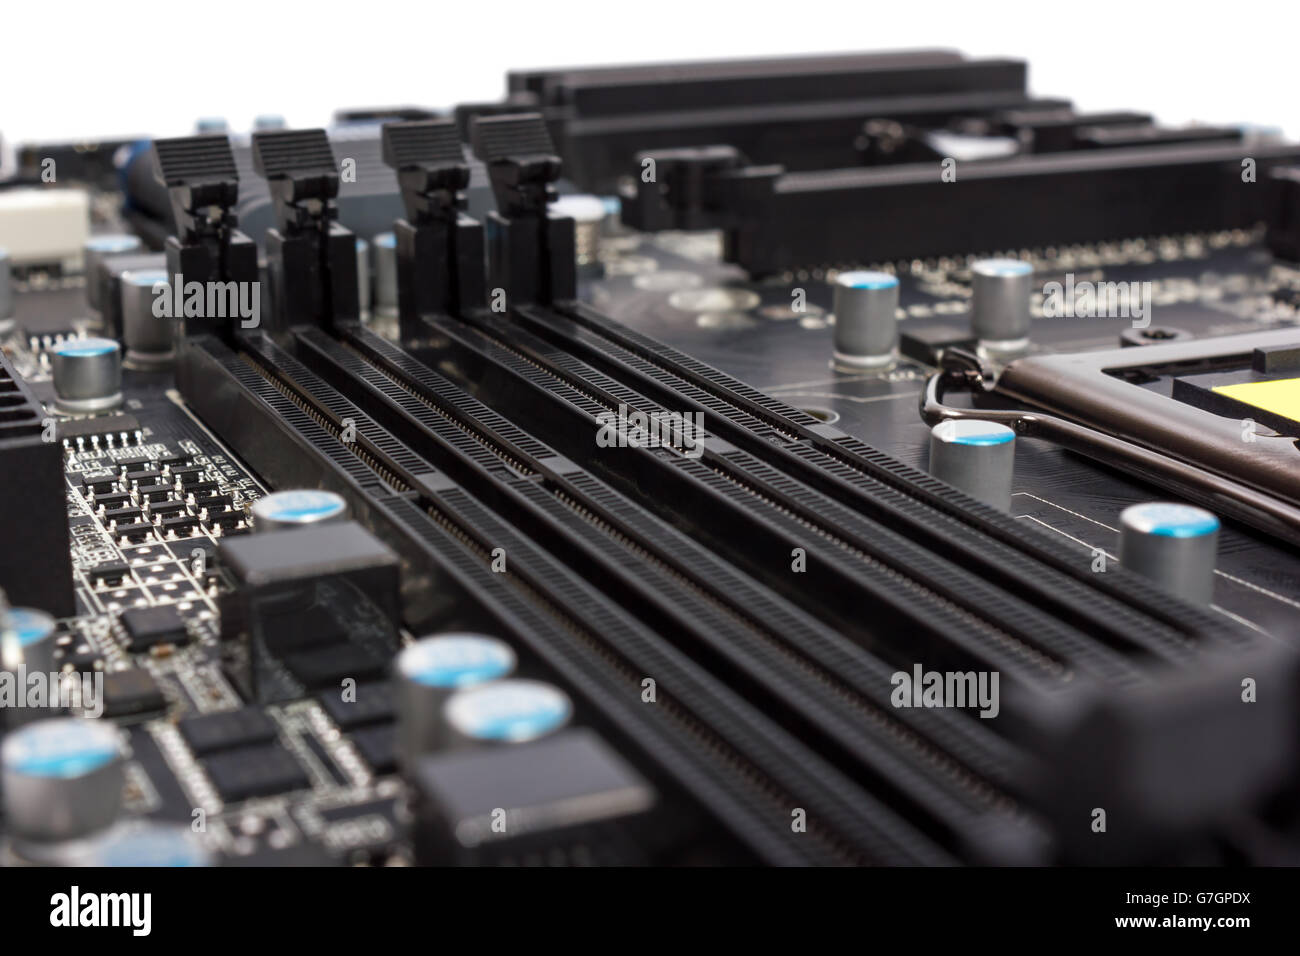 Electronics components on modern PC computer motherboard with RAM connector slot Stock Photo